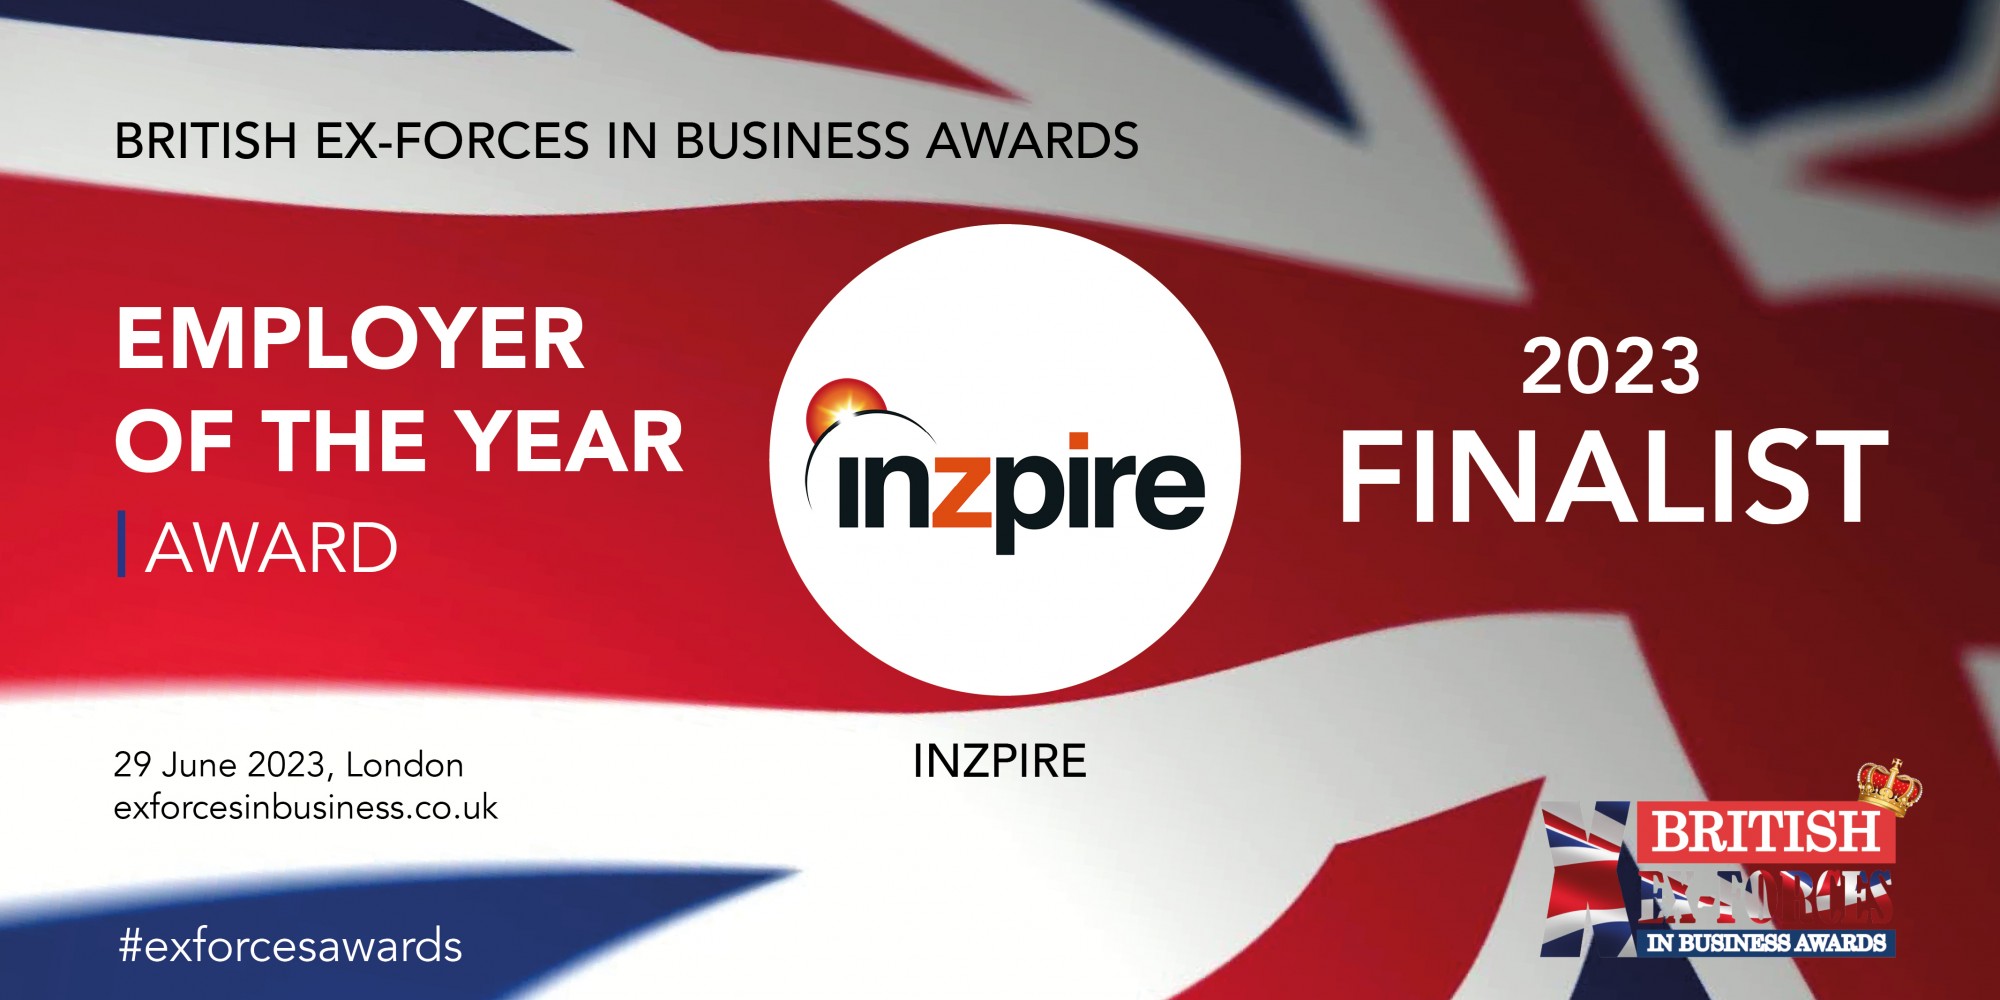 A graphic featuring the Union Jack flag announces Inzpire as a finalist in the Employer of the Year category of the British Ex-Forces in Business Awards 2023.  